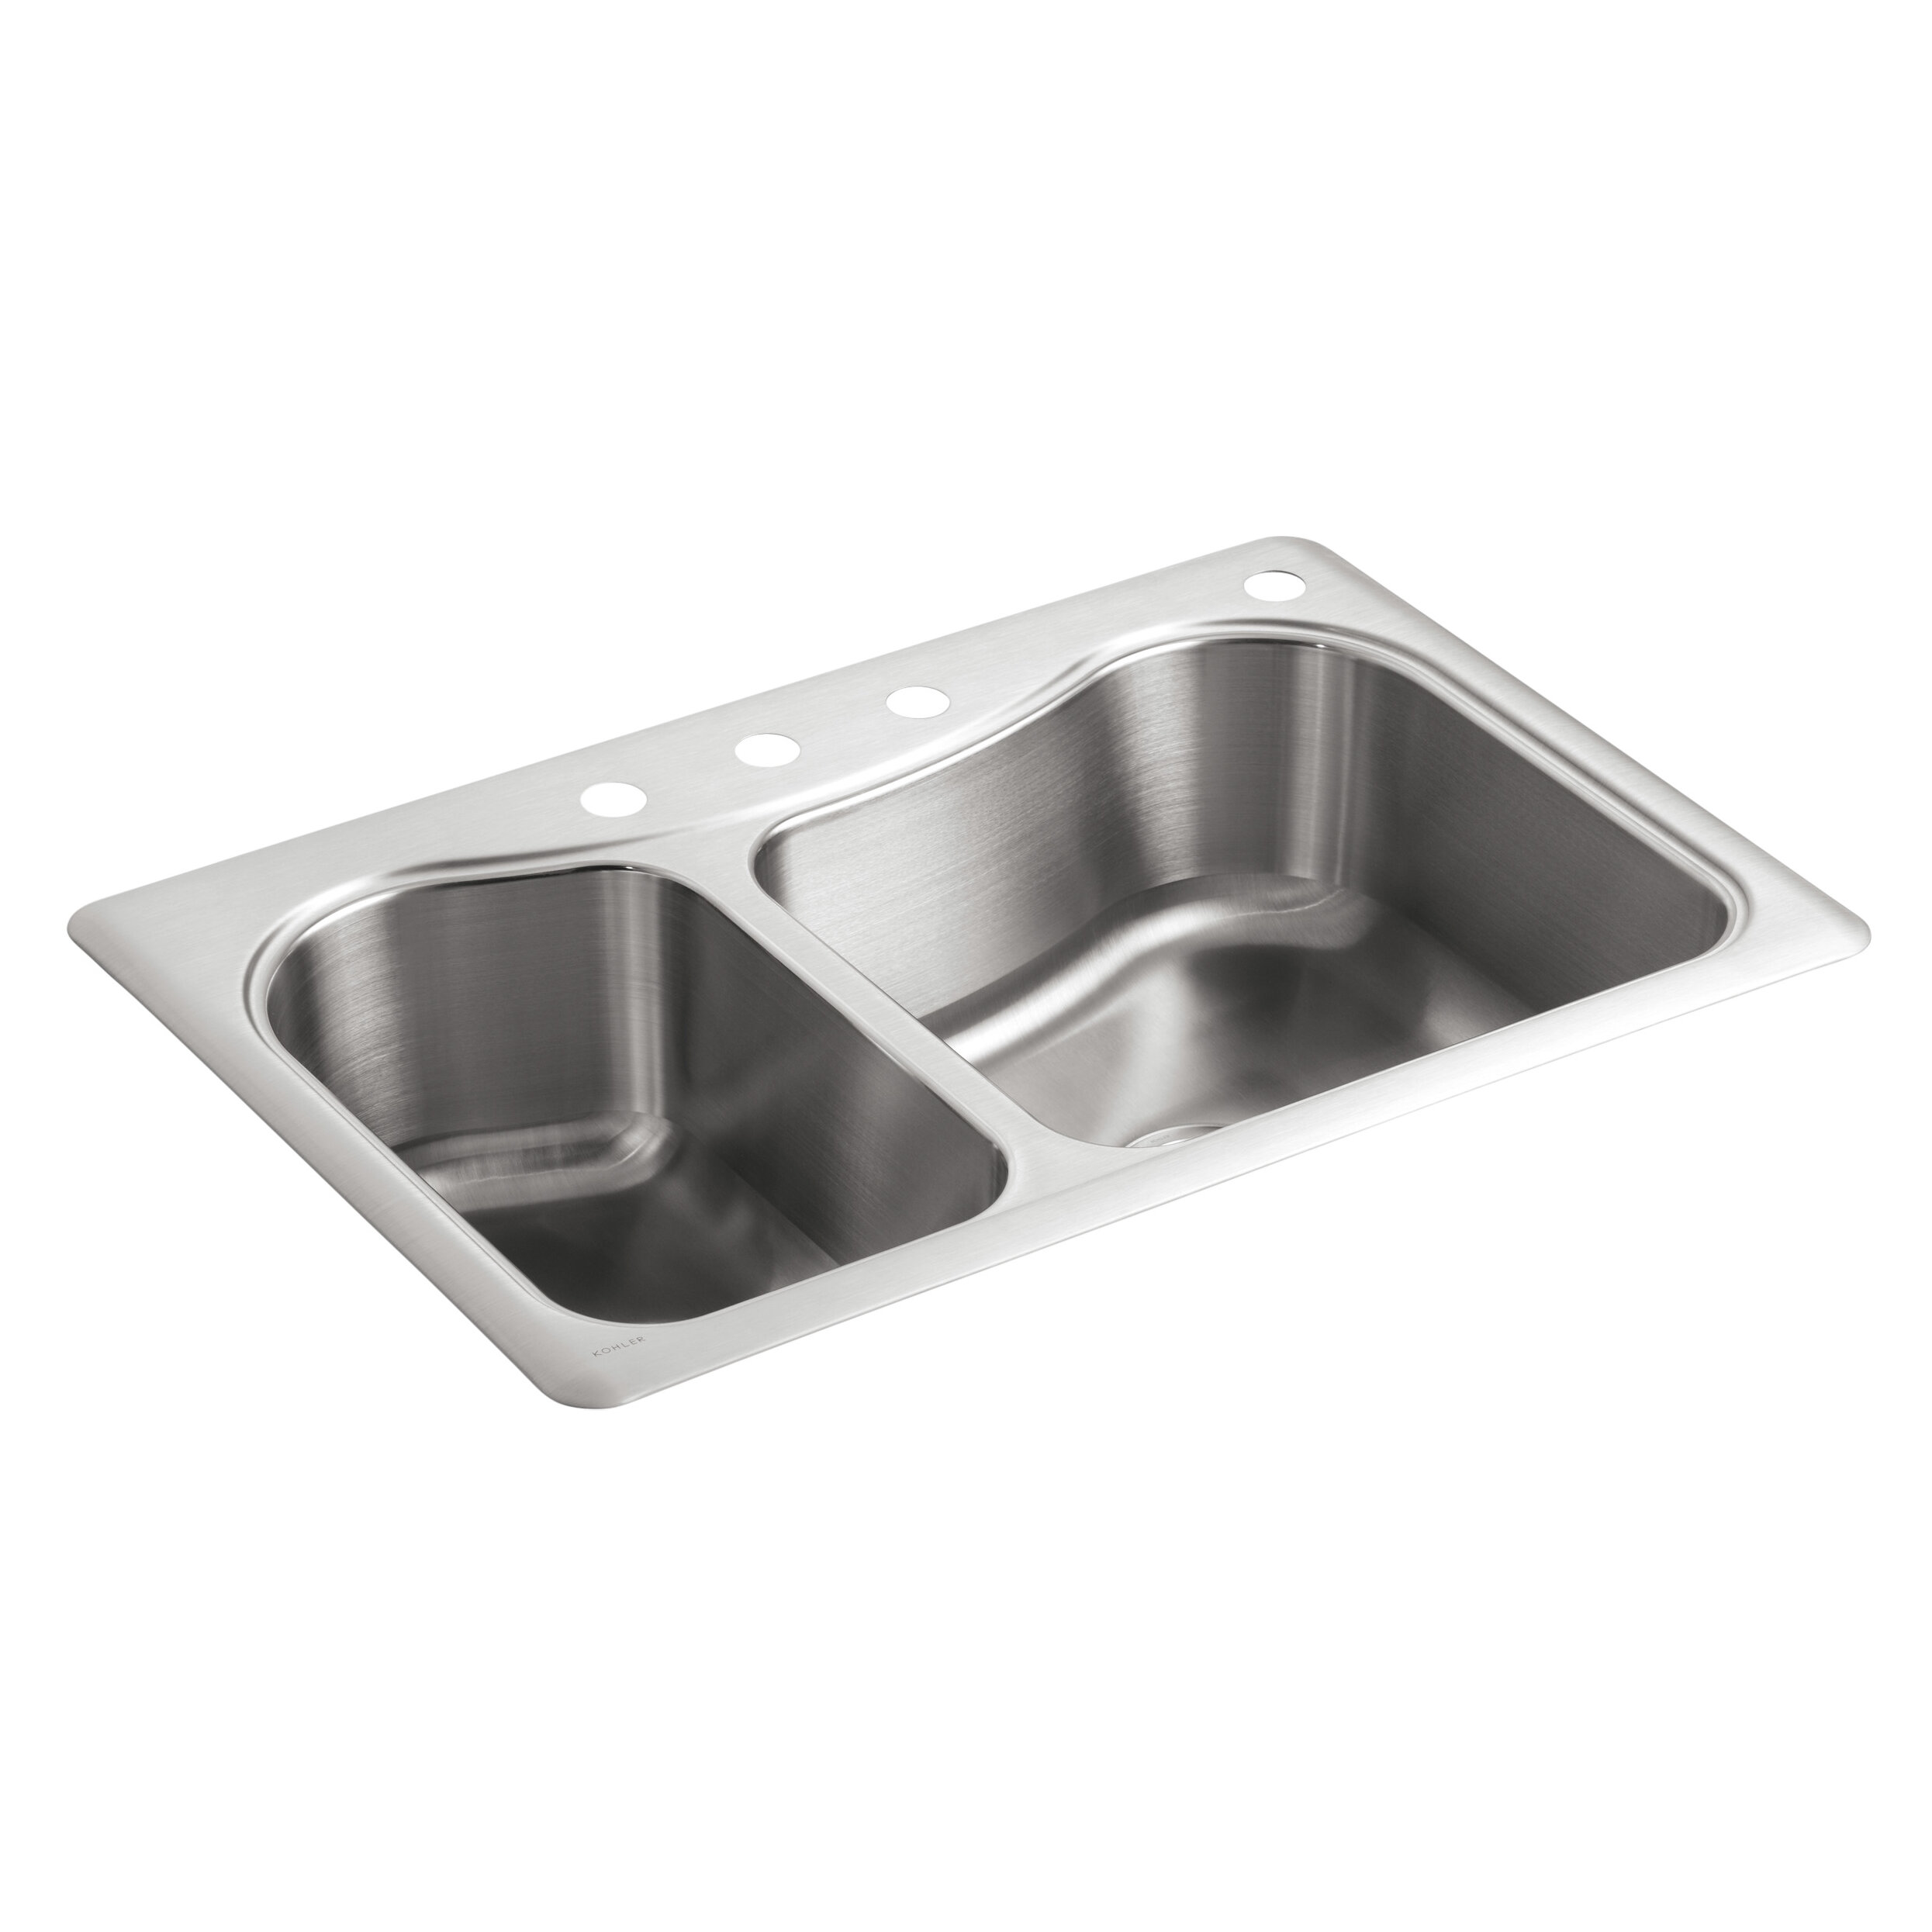 Cantrio Double Bowl 27 1 4 Stainless Steel Top Mount Kitchen Sink